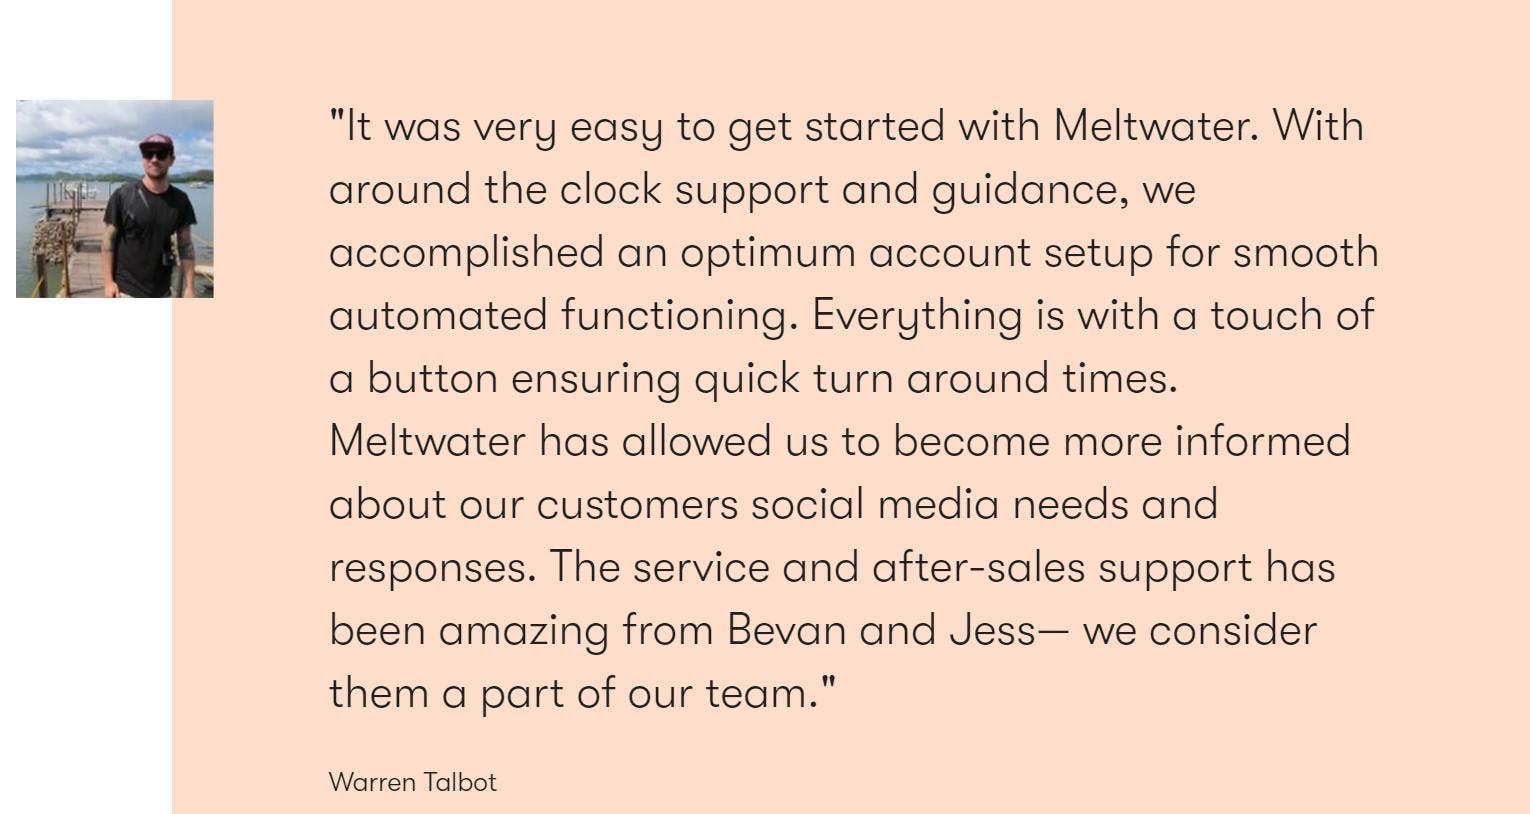 Meltwater customer quote. Using positive customer stories is a great word-of-mouth marketing practice.